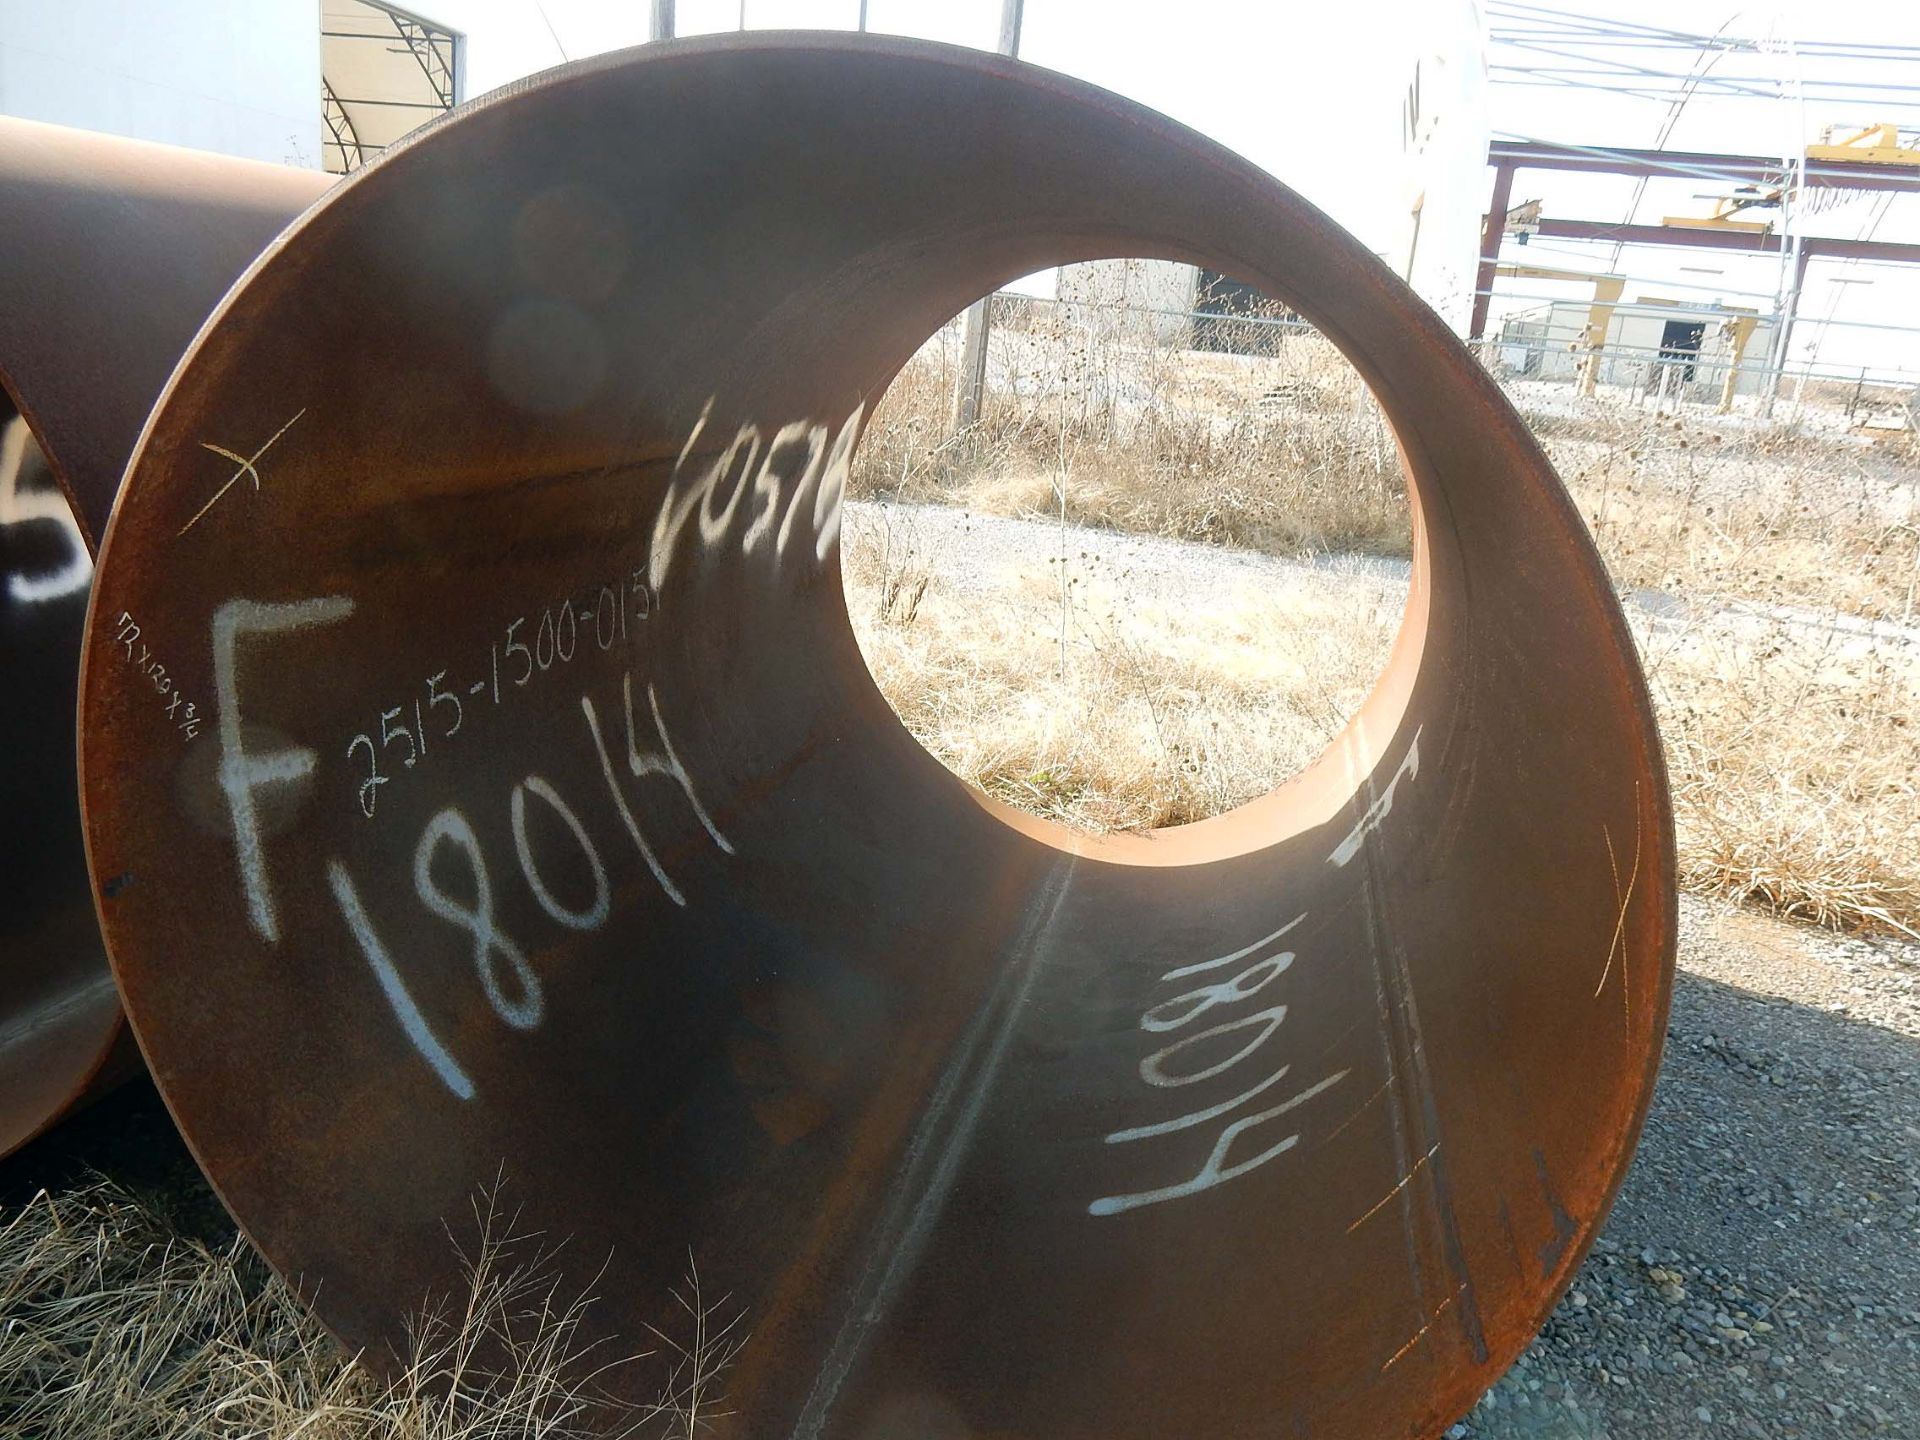 LOT CONSISTING OF: APPROX. 1 EA. SHELL,LONG SEAM WELDED,72" O.D. X 120" LG X 3/4" THK,SA-516-70,MUST